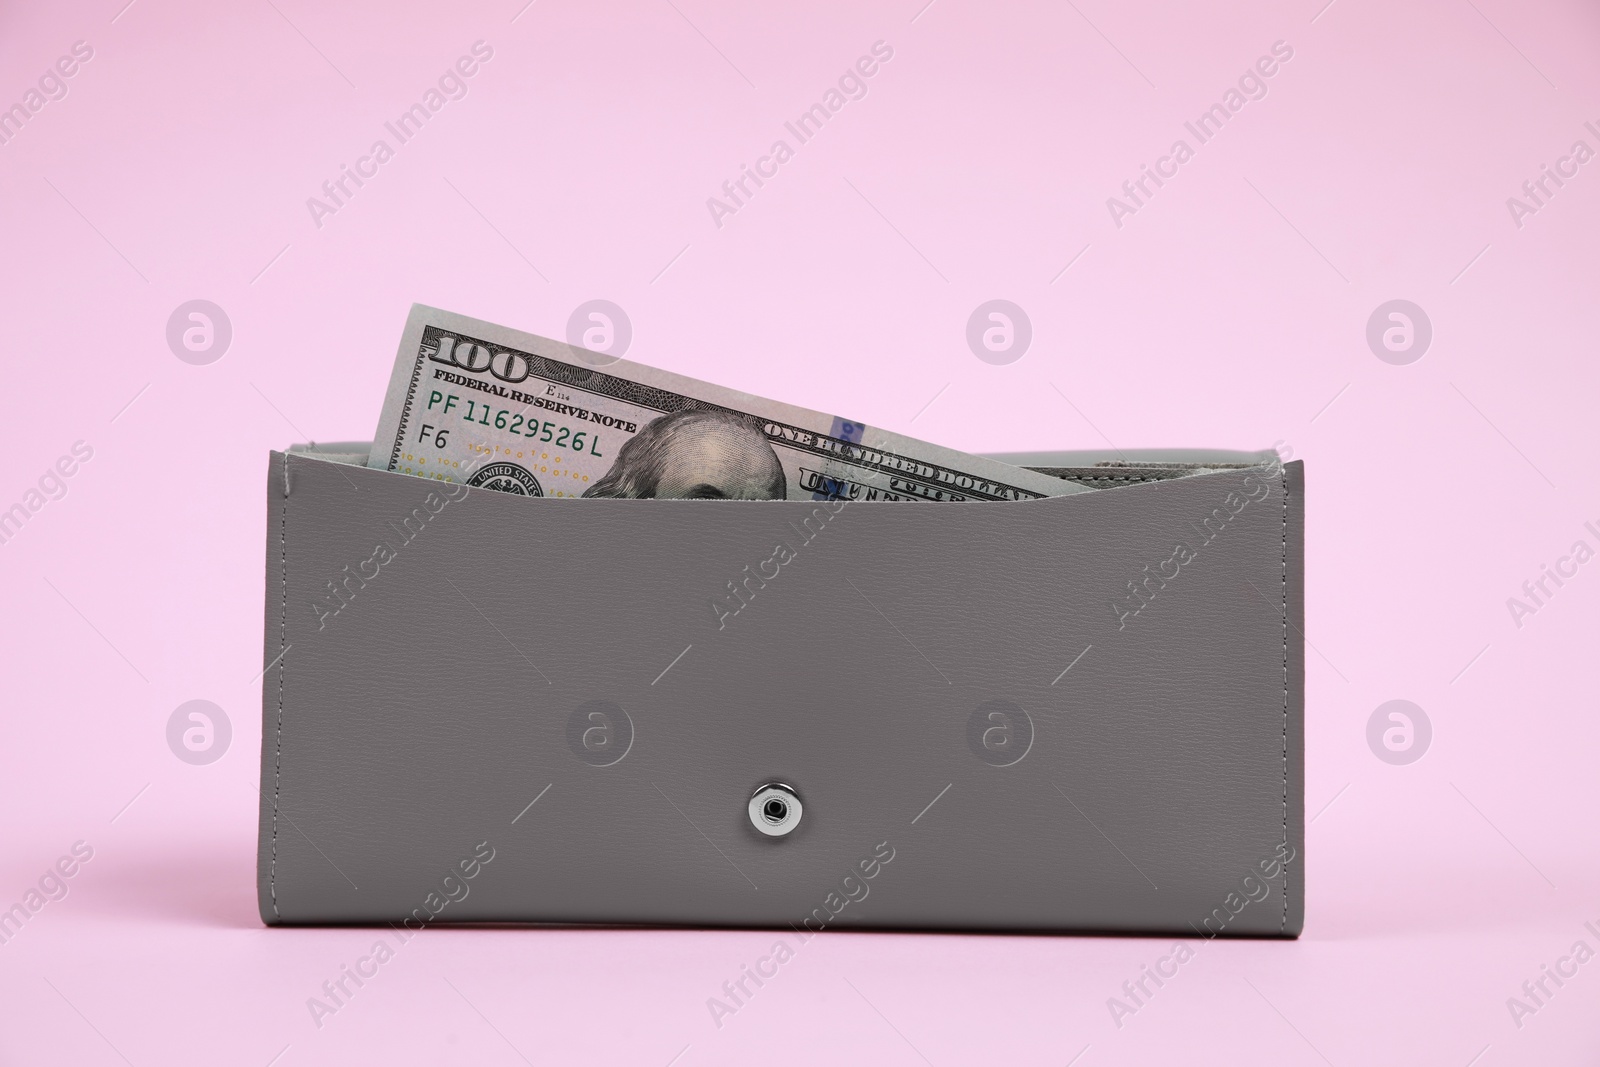 Photo of Stylish grey leather purse with dollar banknote on pink background